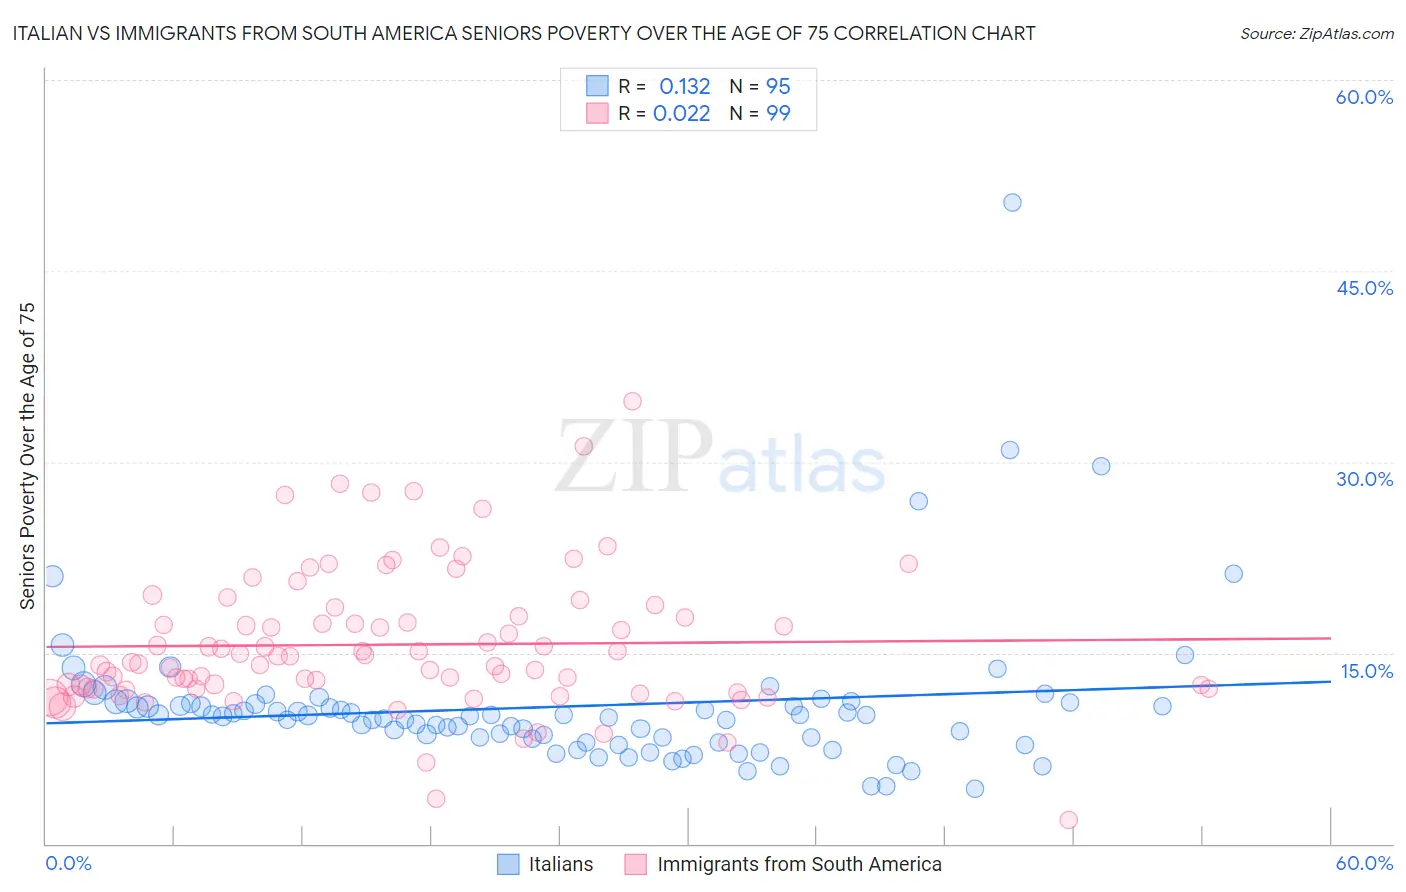 Italian vs Immigrants from South America Seniors Poverty Over the Age of 75